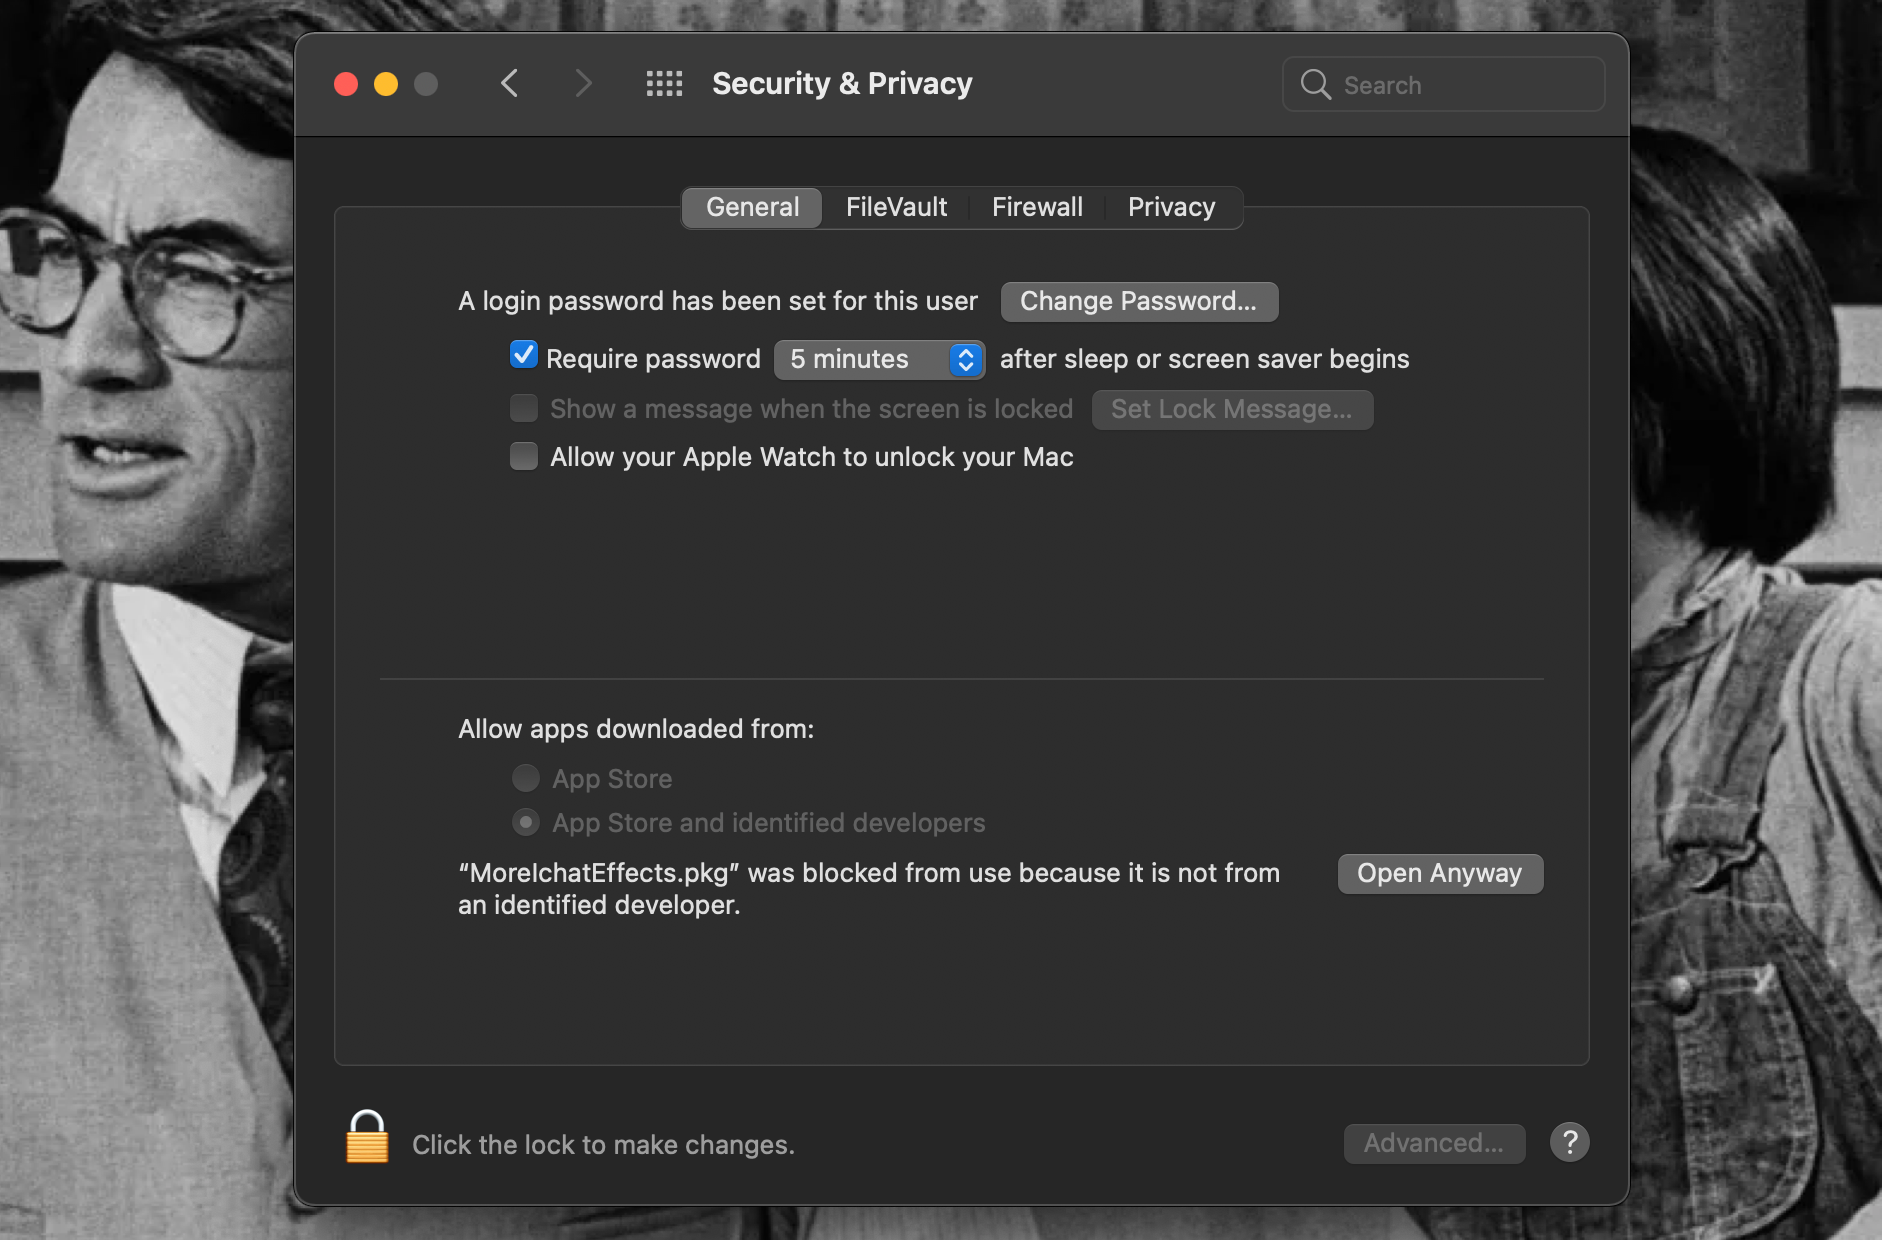 Security & Privacy window in System Preferences open with MoreIchatEffects developer warning